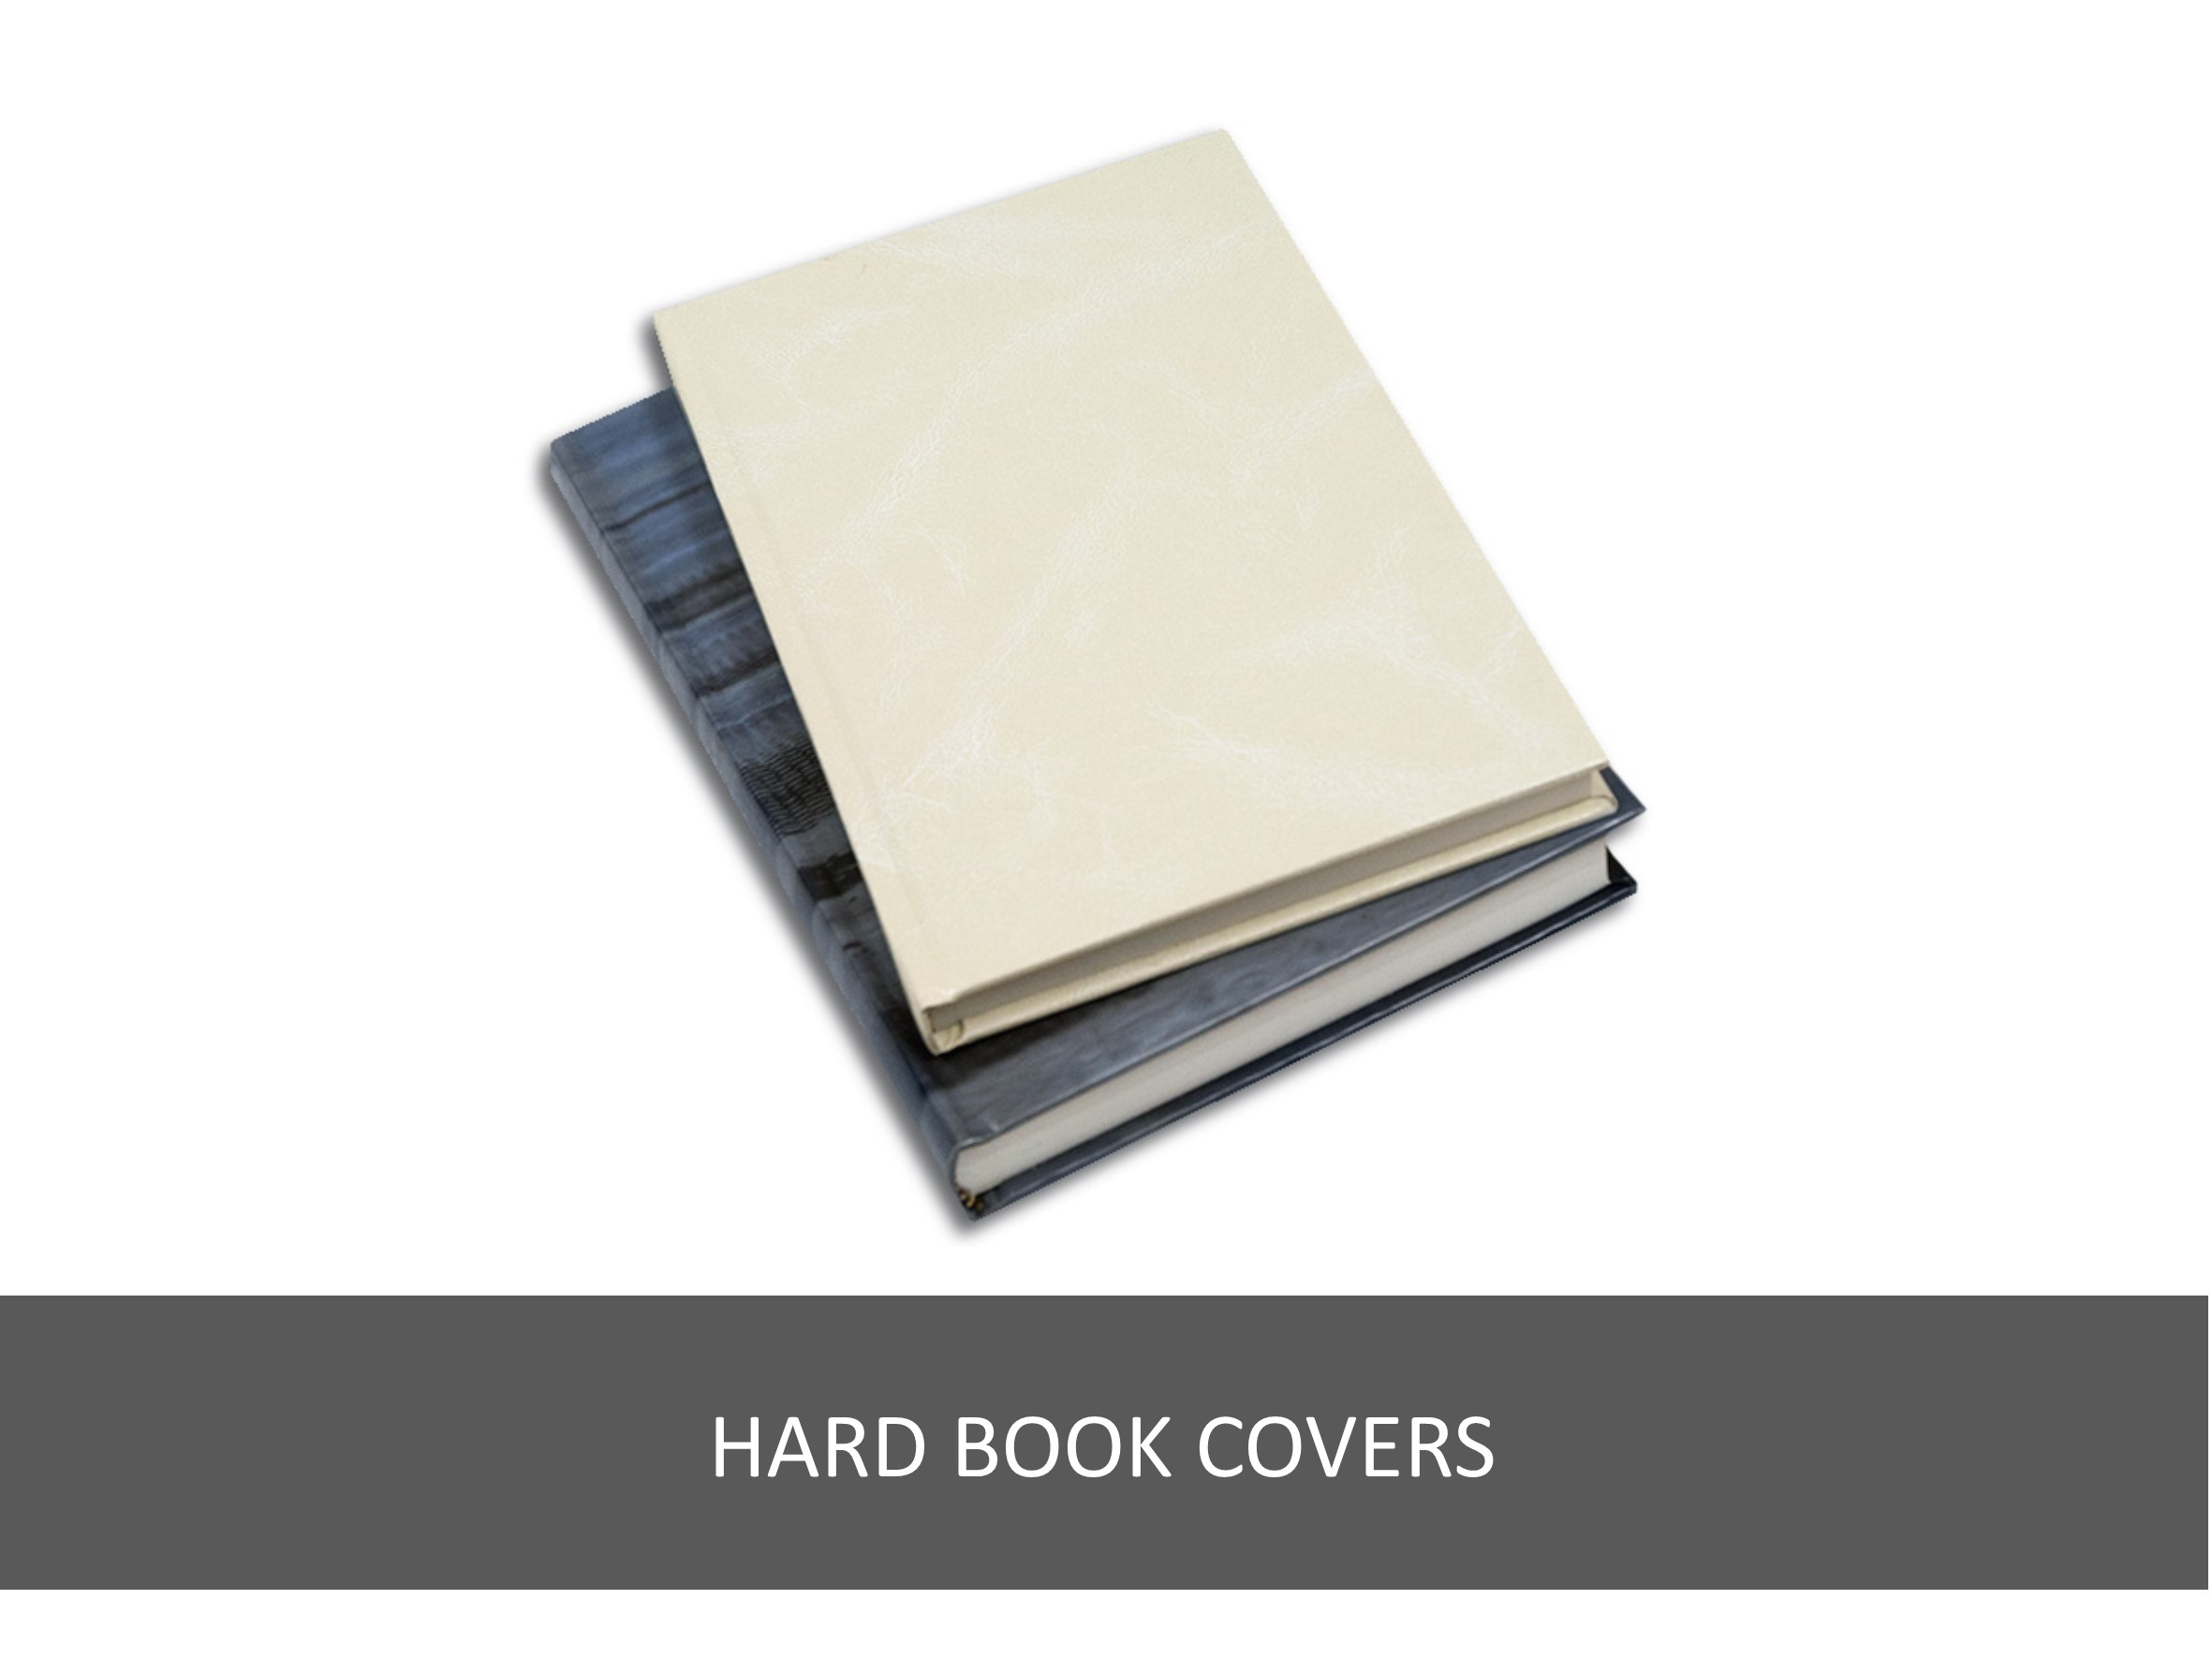 Hard book covers